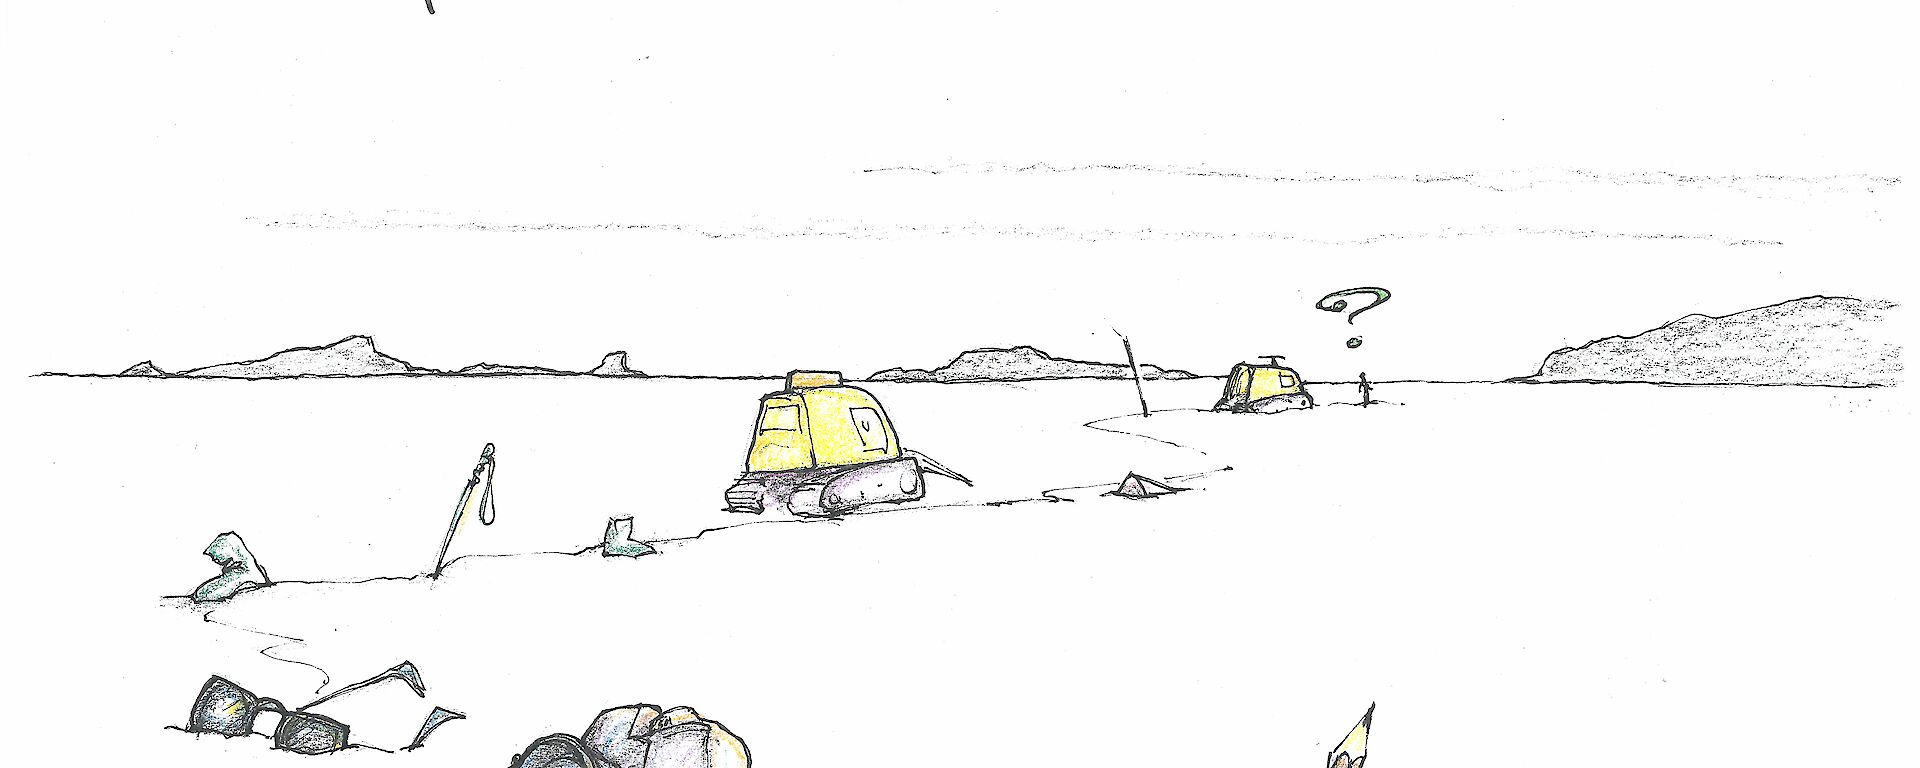 Cartoon illustration of a Hägglunds on the sea ice with numerous personal and scientific items left behind